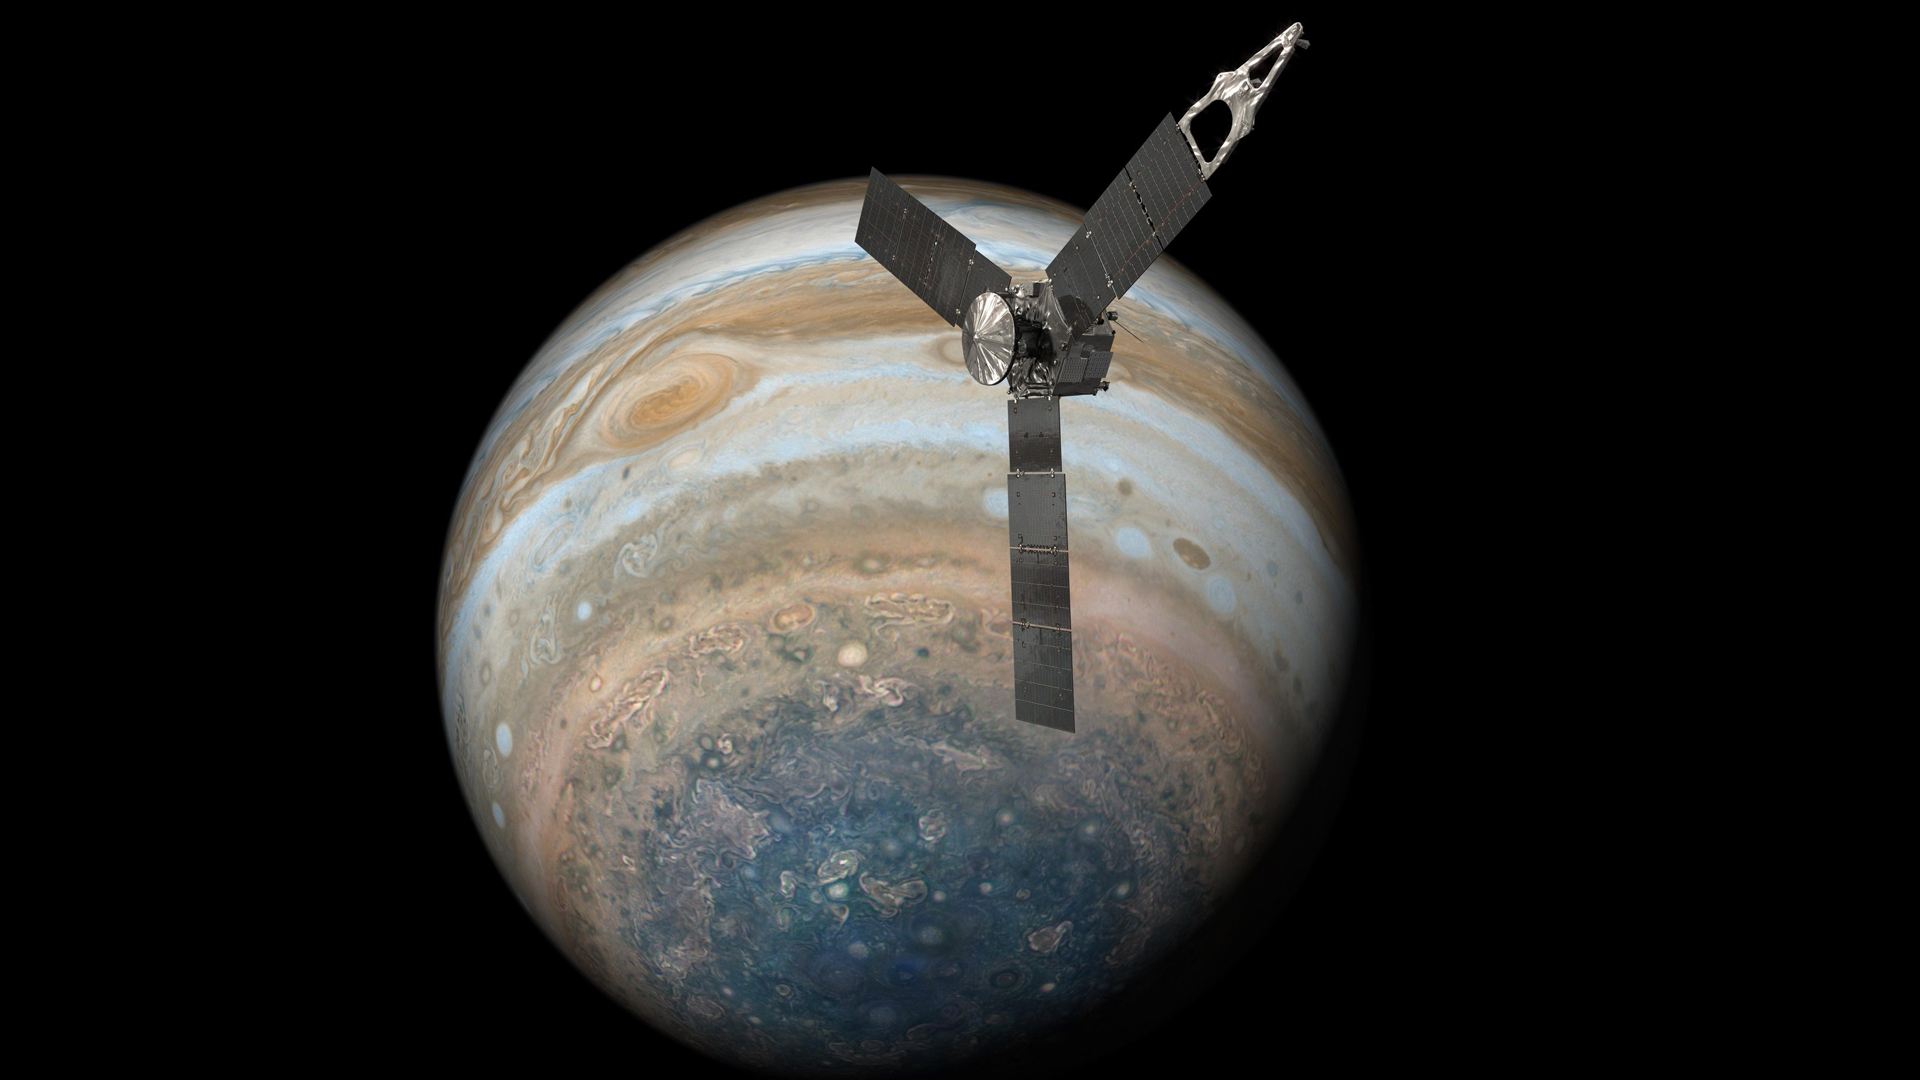 Juno spacecraft recovering its memory after mind-blowing Jupiter flyby, NASA says